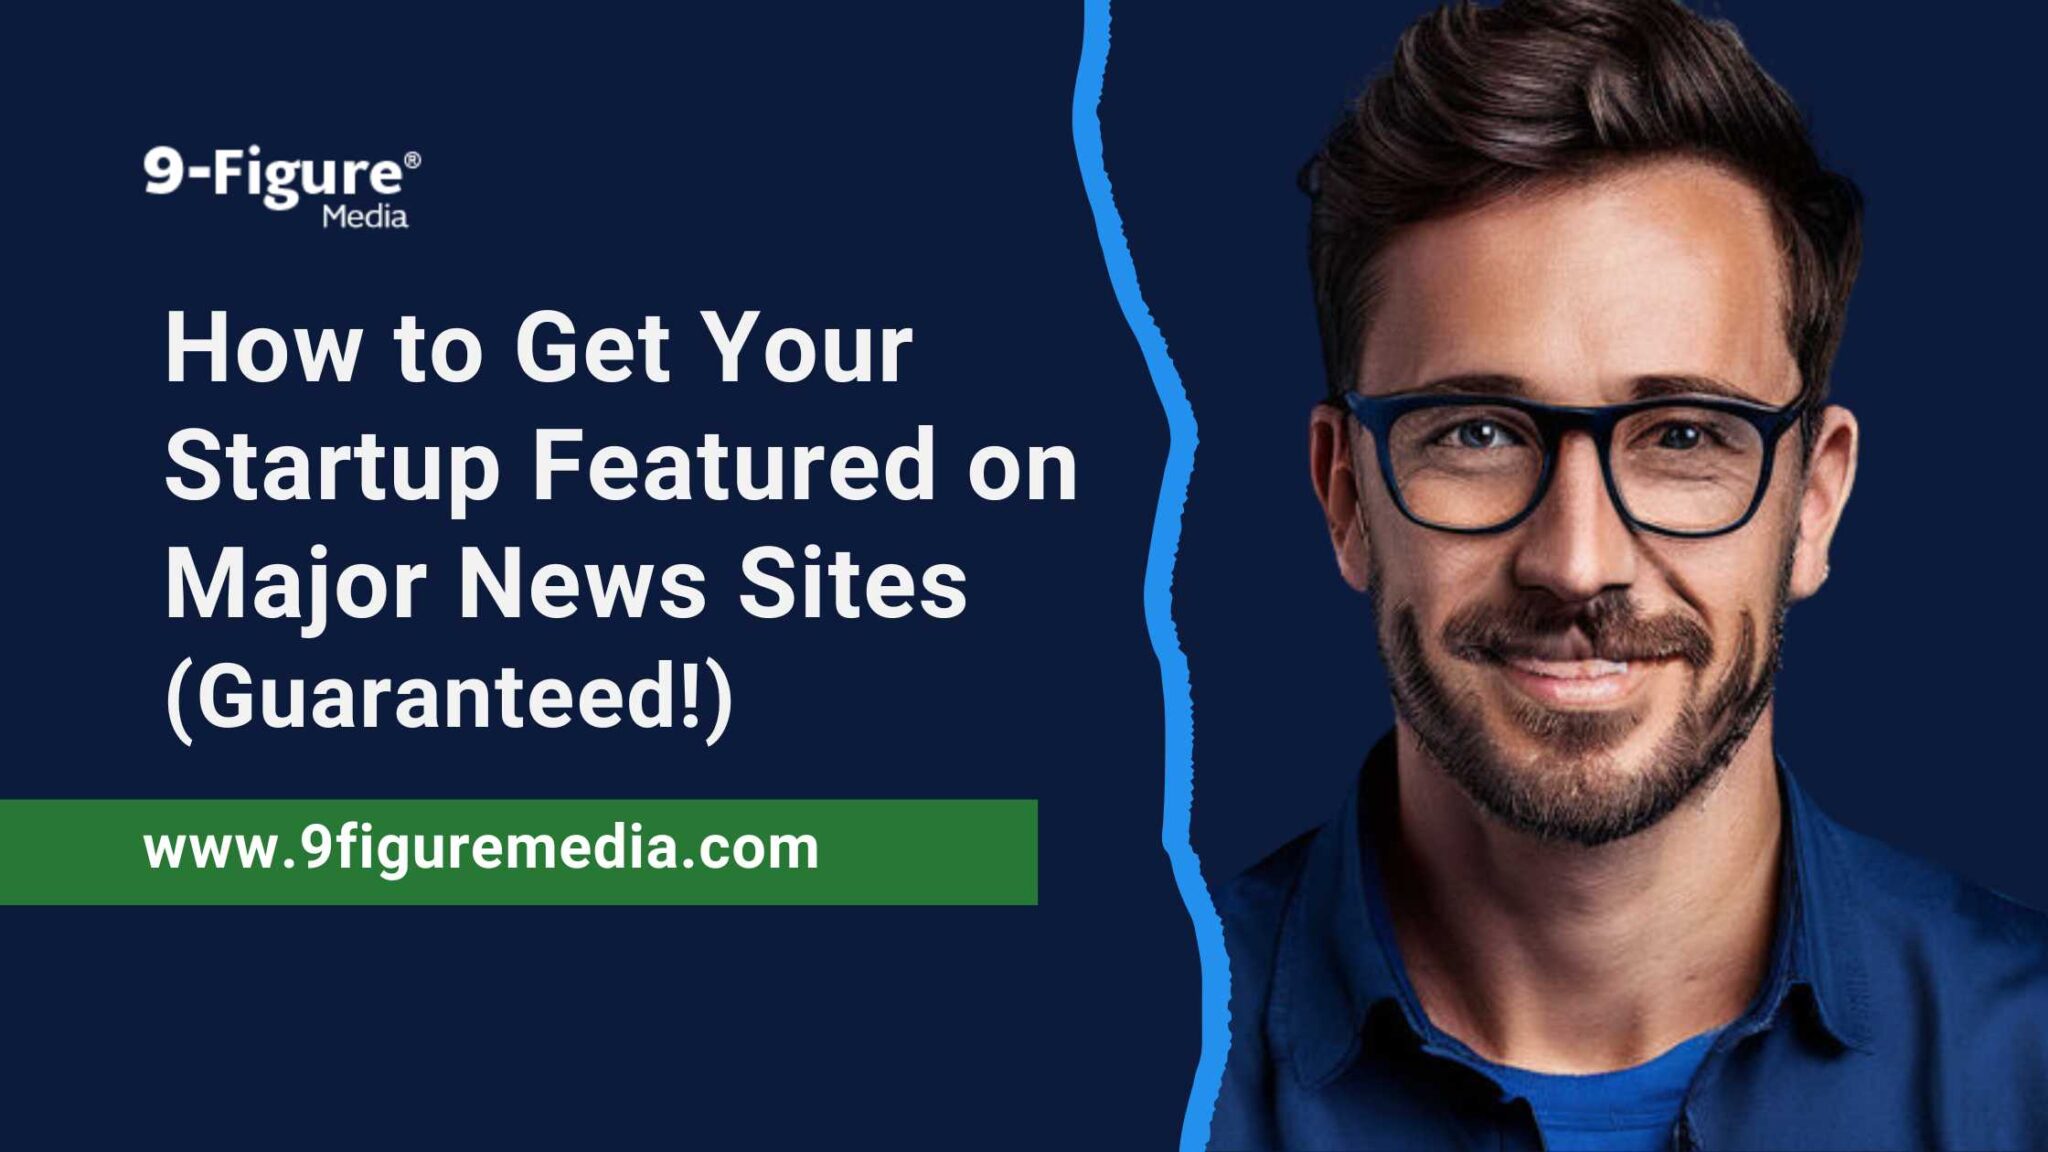 How to Get Your Startup Featured on Major News Sites (Guaranteed!)